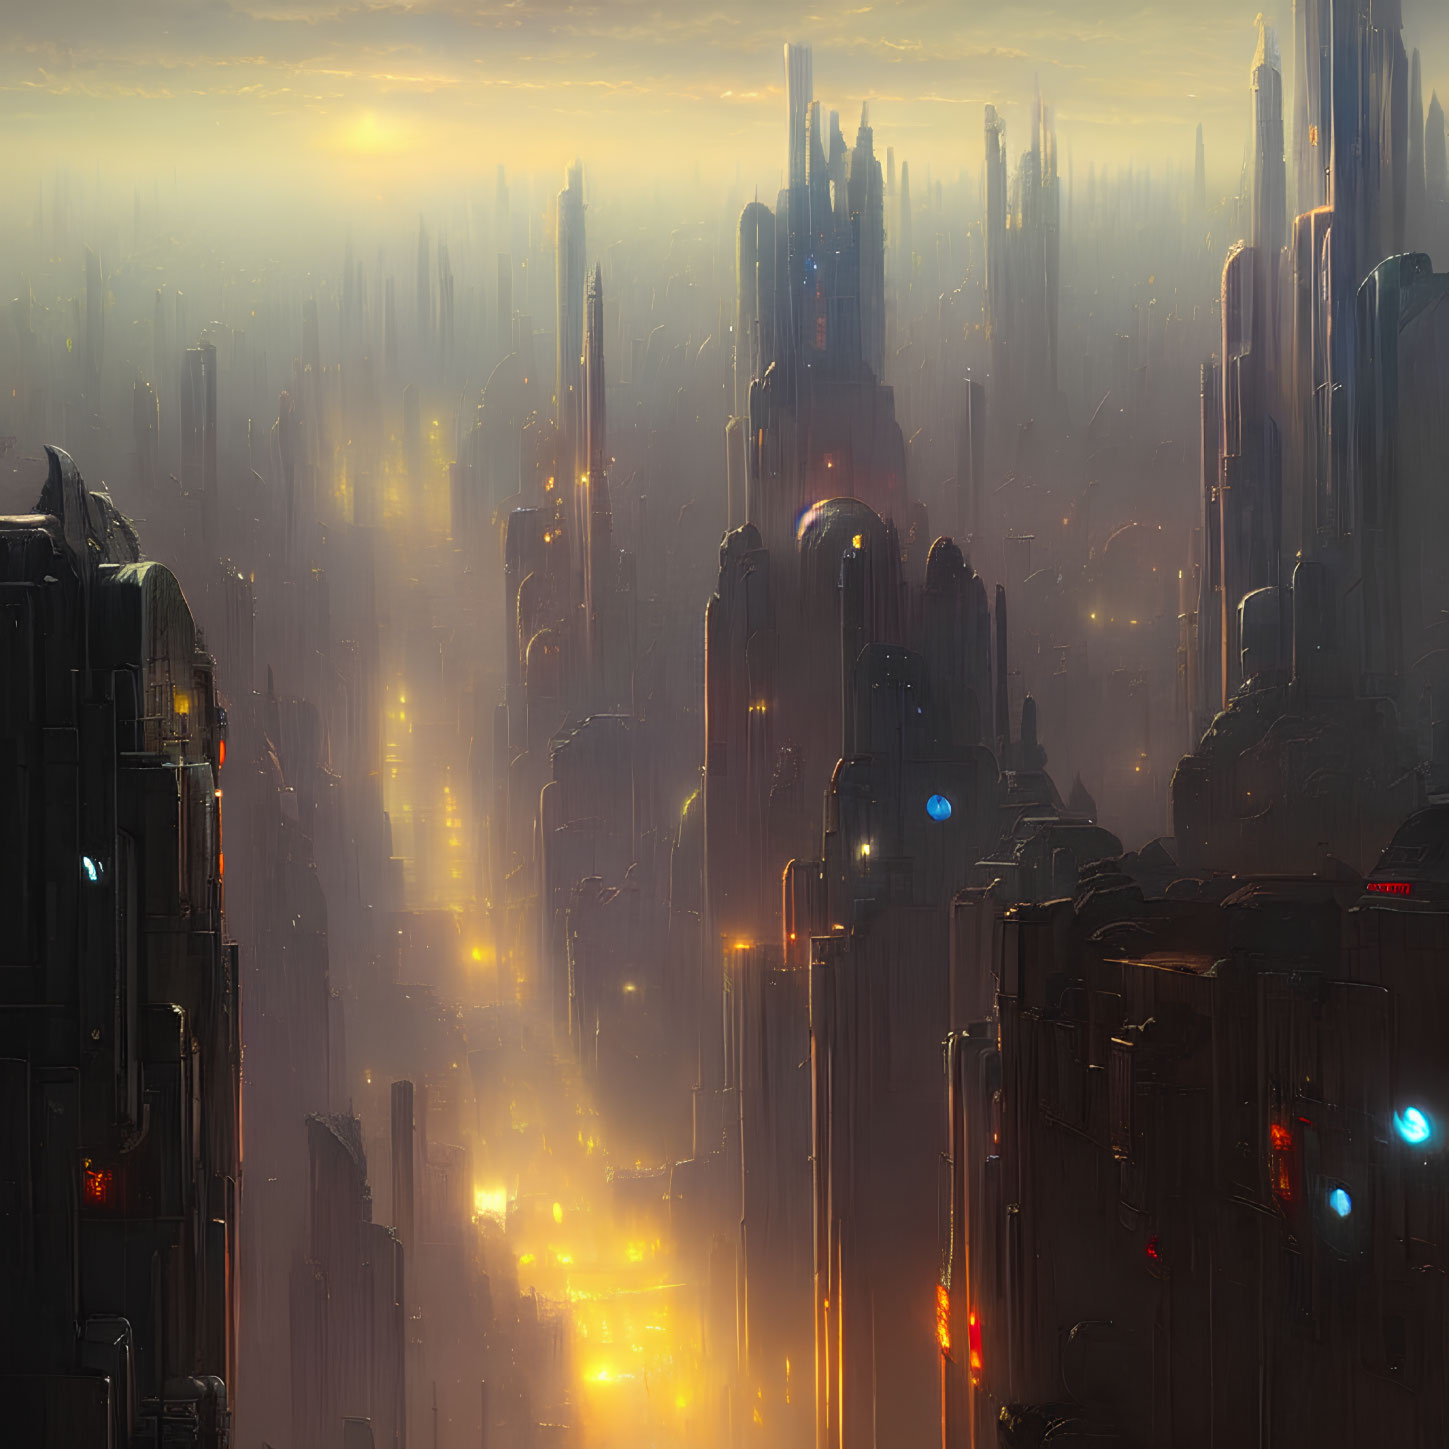 Futuristic cityscape at dusk: towering skyscrapers, glowing lights, hazy atmosphere